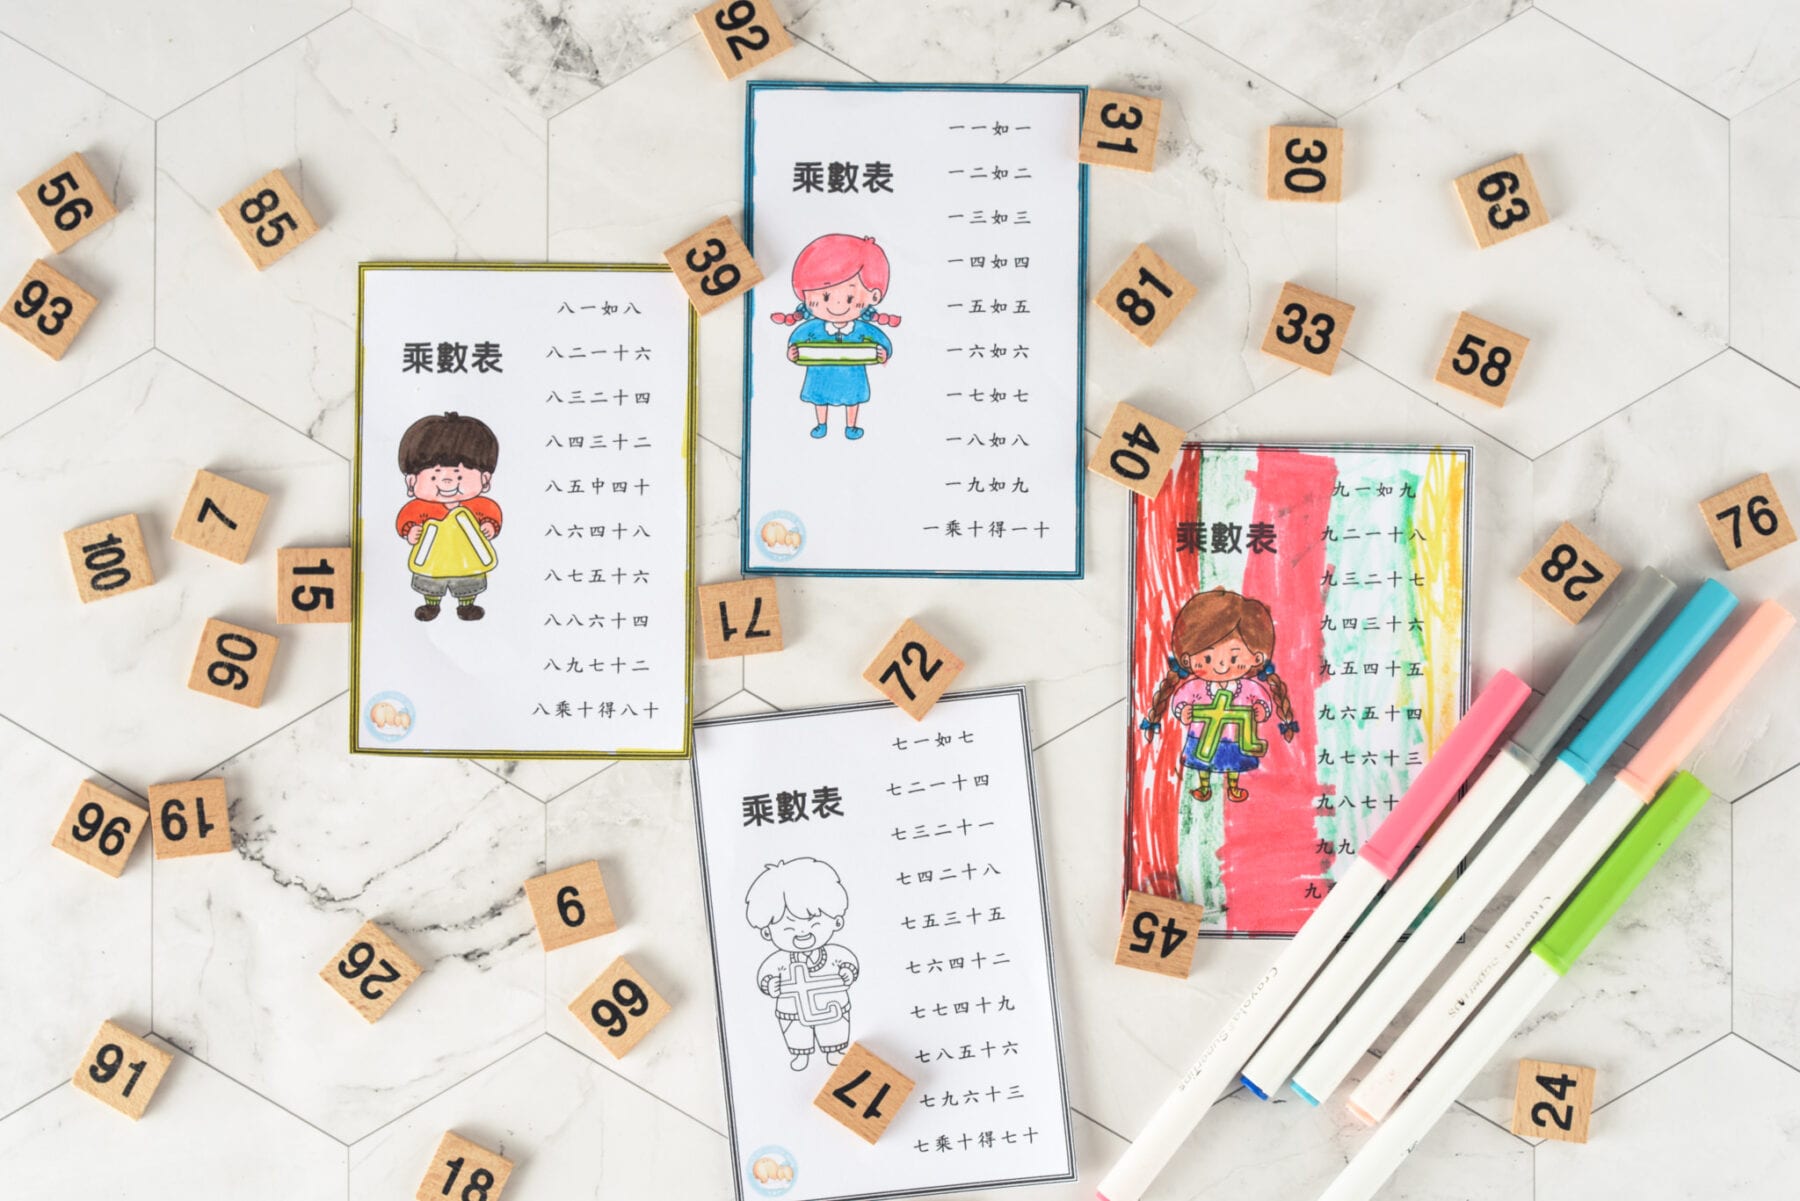 5 steps to help kids memorize the Chinese multiplication table